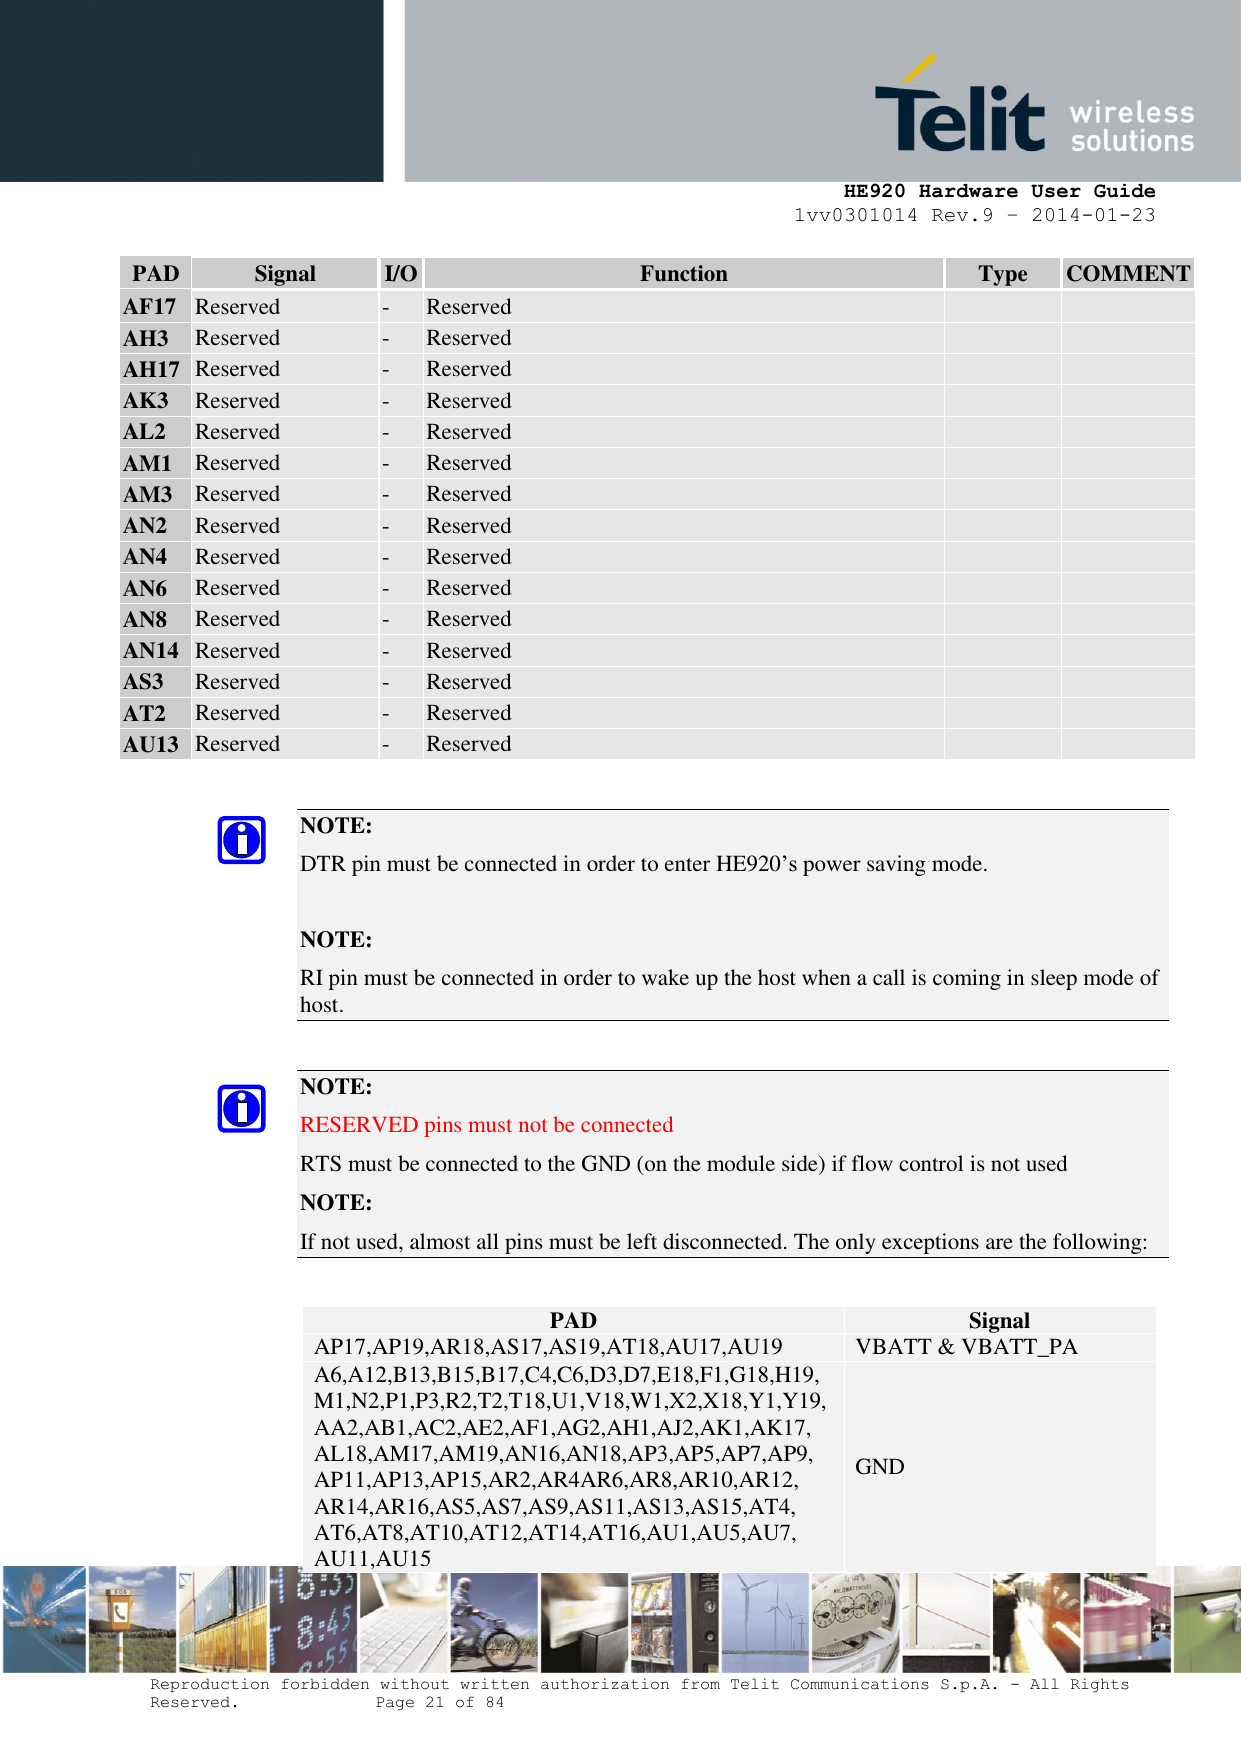     HE920 Hardware User Guide 1vv0301014 Rev.9 – 2014-01-23 Reproduction forbidden without written authorization from Telit Communications S.p.A. - All Rights Reserved.    Page 21 of 84  PAD Signal I/O Function Type COMMENT AF17 Reserved - Reserved   AH3 Reserved - Reserved   AH17 Reserved - Reserved   AK3 Reserved - Reserved   AL2 Reserved - Reserved   AM1 Reserved - Reserved   AM3 Reserved - Reserved   AN2 Reserved - Reserved   AN4 Reserved - Reserved   AN6 Reserved - Reserved   AN8 Reserved - Reserved   AN14 Reserved - Reserved   AS3 Reserved - Reserved   AT2 Reserved - Reserved   AU13 Reserved - Reserved    NOTE:  DTR pin must be connected in order to enter HE920’s power saving mode.  NOTE: RI pin must be connected in order to wake up the host when a call is coming in sleep mode of host.  NOTE:  RESERVED pins must not be connected RTS must be connected to the GND (on the module side) if flow control is not used   NOTE: If not used, almost all pins must be left disconnected. The only exceptions are the following:  PAD Signal AP17,AP19,AR18,AS17,AS19,AT18,AU17,AU19 VBATT &amp; VBATT_PA A6,A12,B13,B15,B17,C4,C6,D3,D7,E18,F1,G18,H19,M1,N2,P1,P3,R2,T2,T18,U1,V18,W1,X2,X18,Y1,Y19,AA2,AB1,AC2,AE2,AF1,AG2,AH1,AJ2,AK1,AK17, AL18,AM17,AM19,AN16,AN18,AP3,AP5,AP7,AP9, AP11,AP13,AP15,AR2,AR4AR6,AR8,AR10,AR12, AR14,AR16,AS5,AS7,AS9,AS11,AS13,AS15,AT4, AT6,AT8,AT10,AT12,AT14,AT16,AU1,AU5,AU7, AU11,AU15 GND 